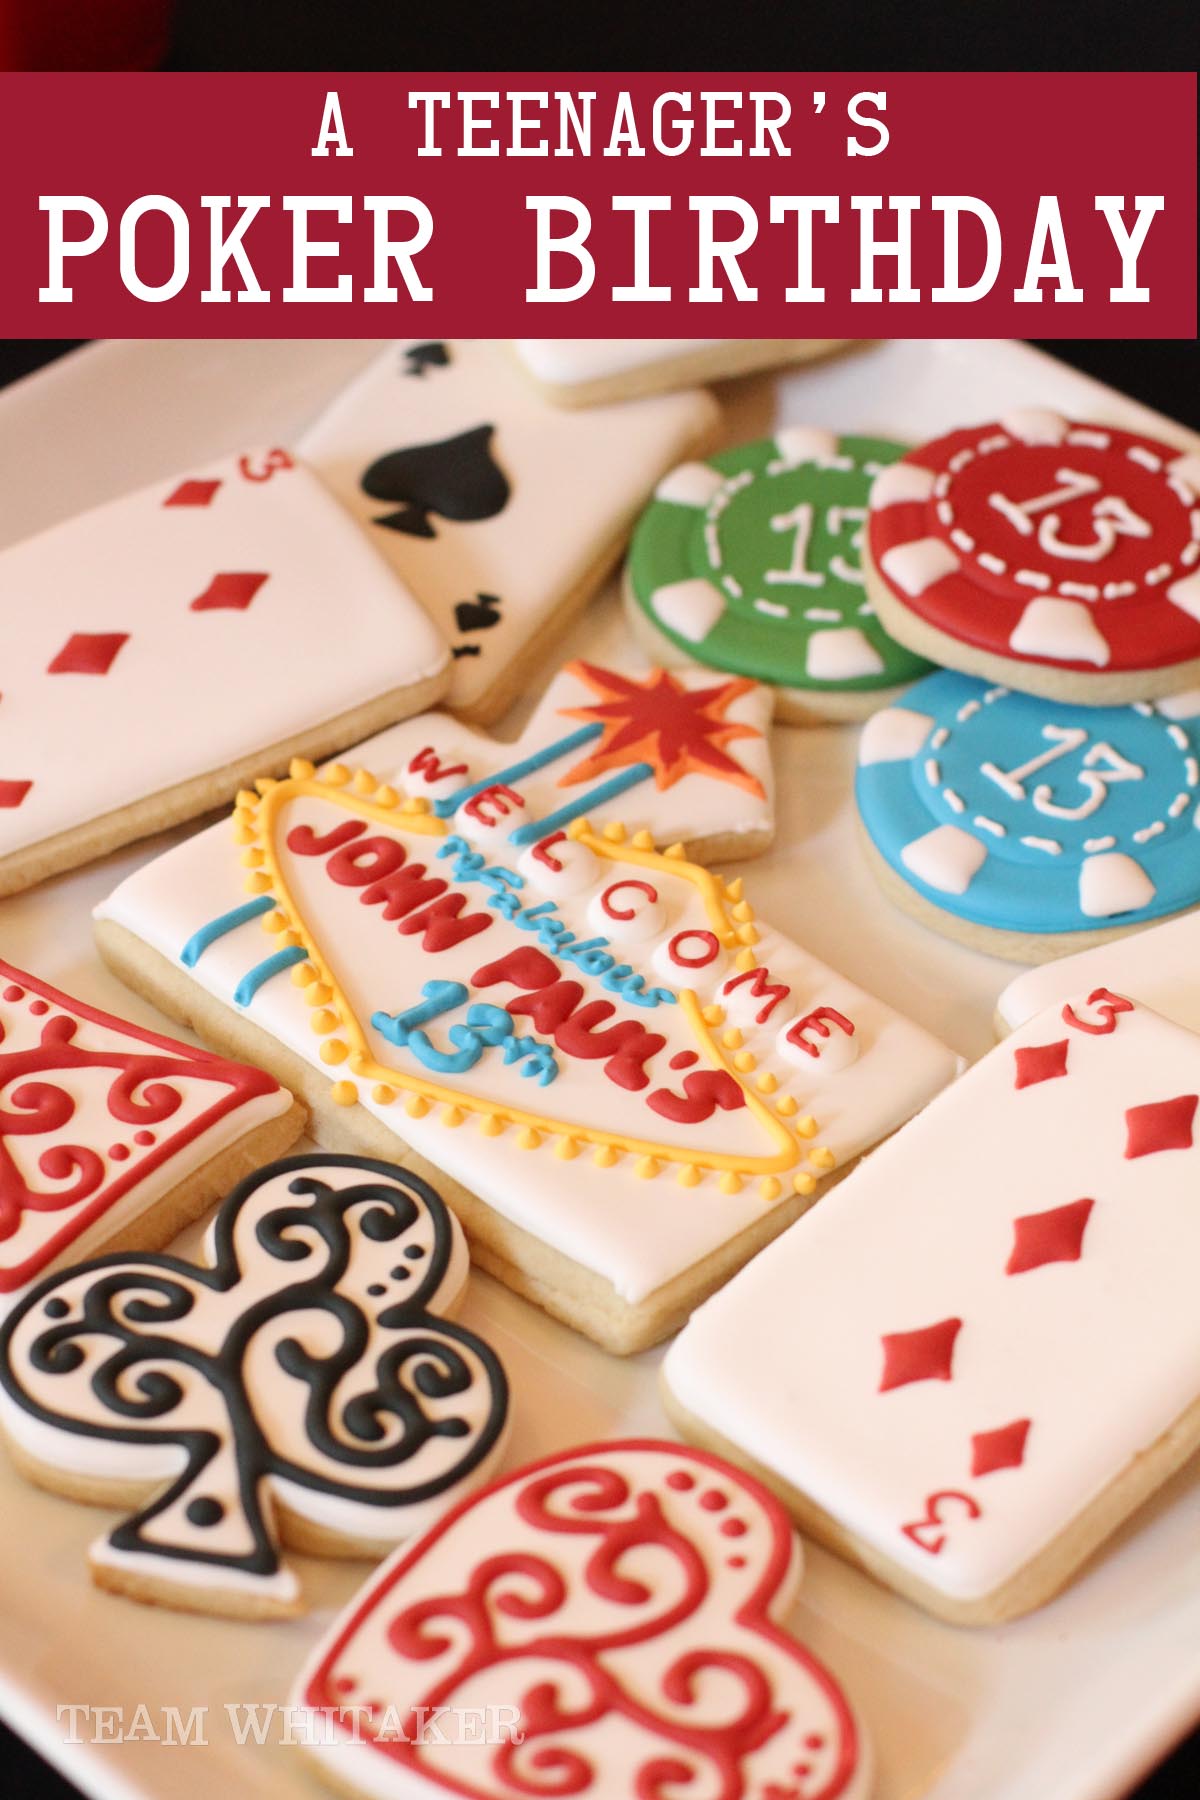 Planning a poker birthday party for your teenage son? From game ideas to inexpensive party favors, great appetizers to simple DIY decor, this party has it all! What happens here, stays here, right?!